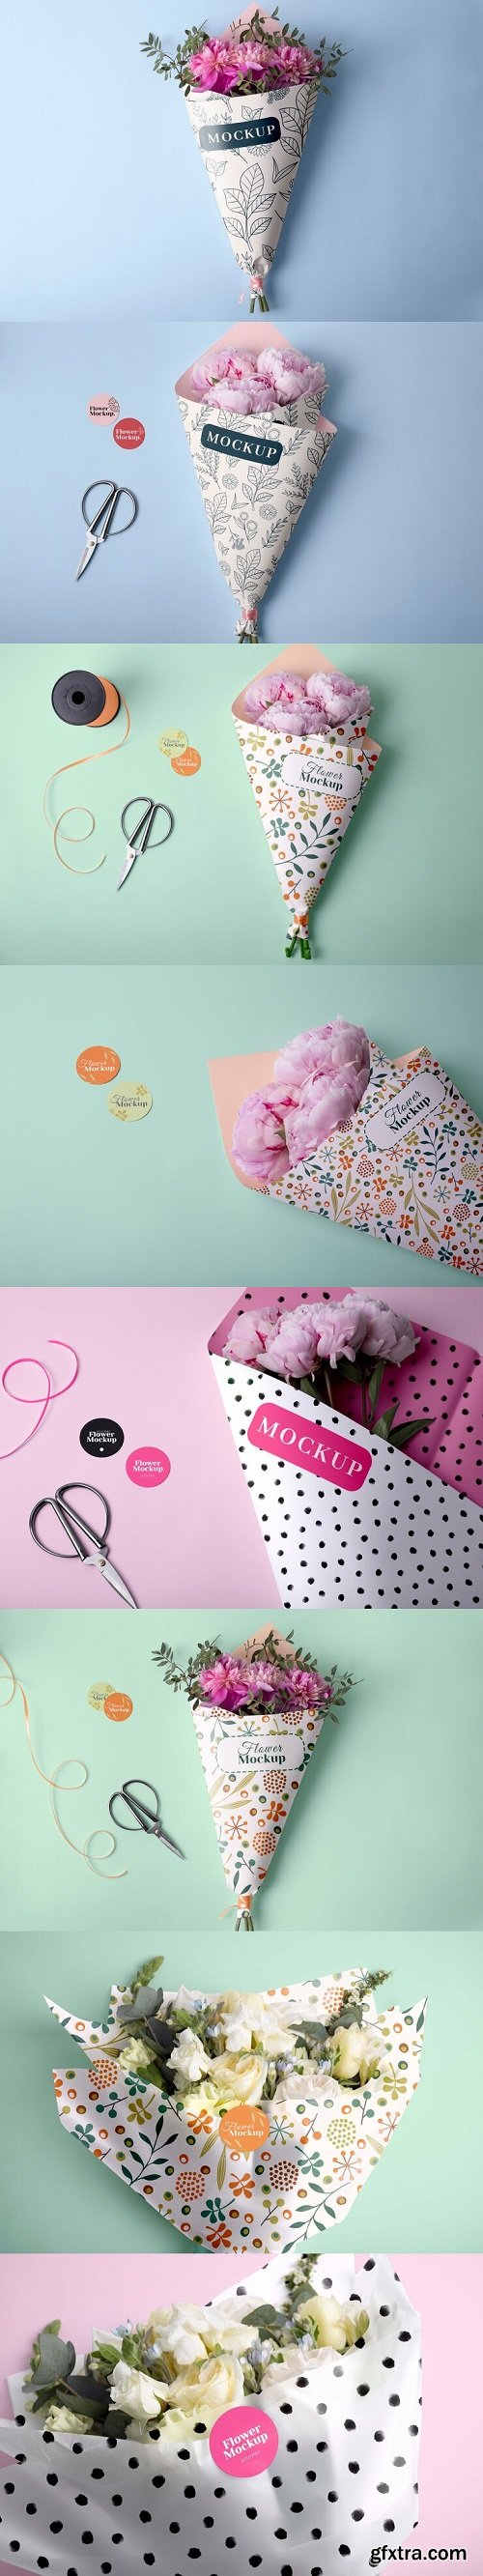 Flower packaging cone mock-up with beautiful flowers bouquet